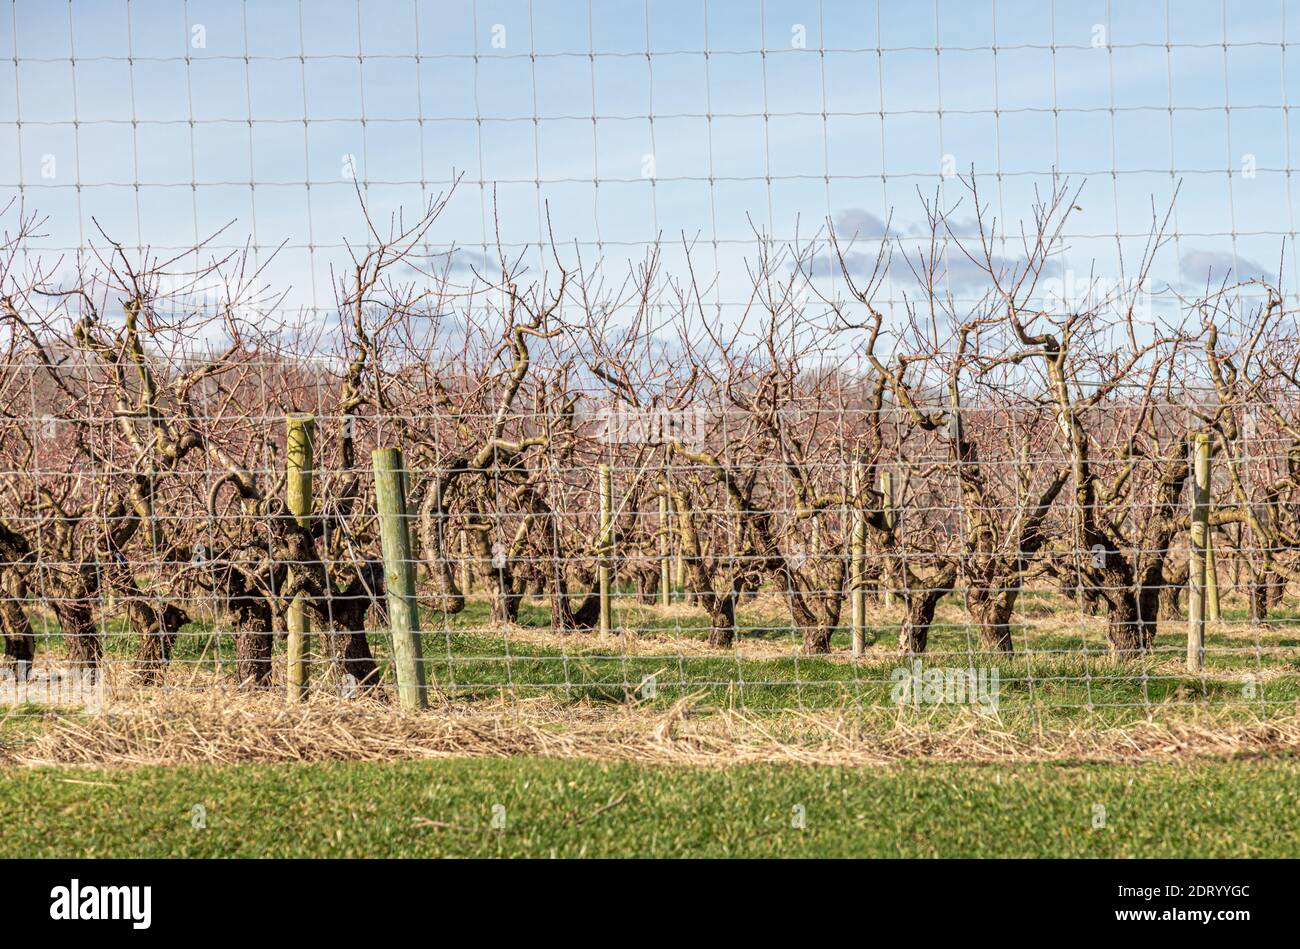 grave vines in a wine vineyard in Water Mill, NY Stock Photo